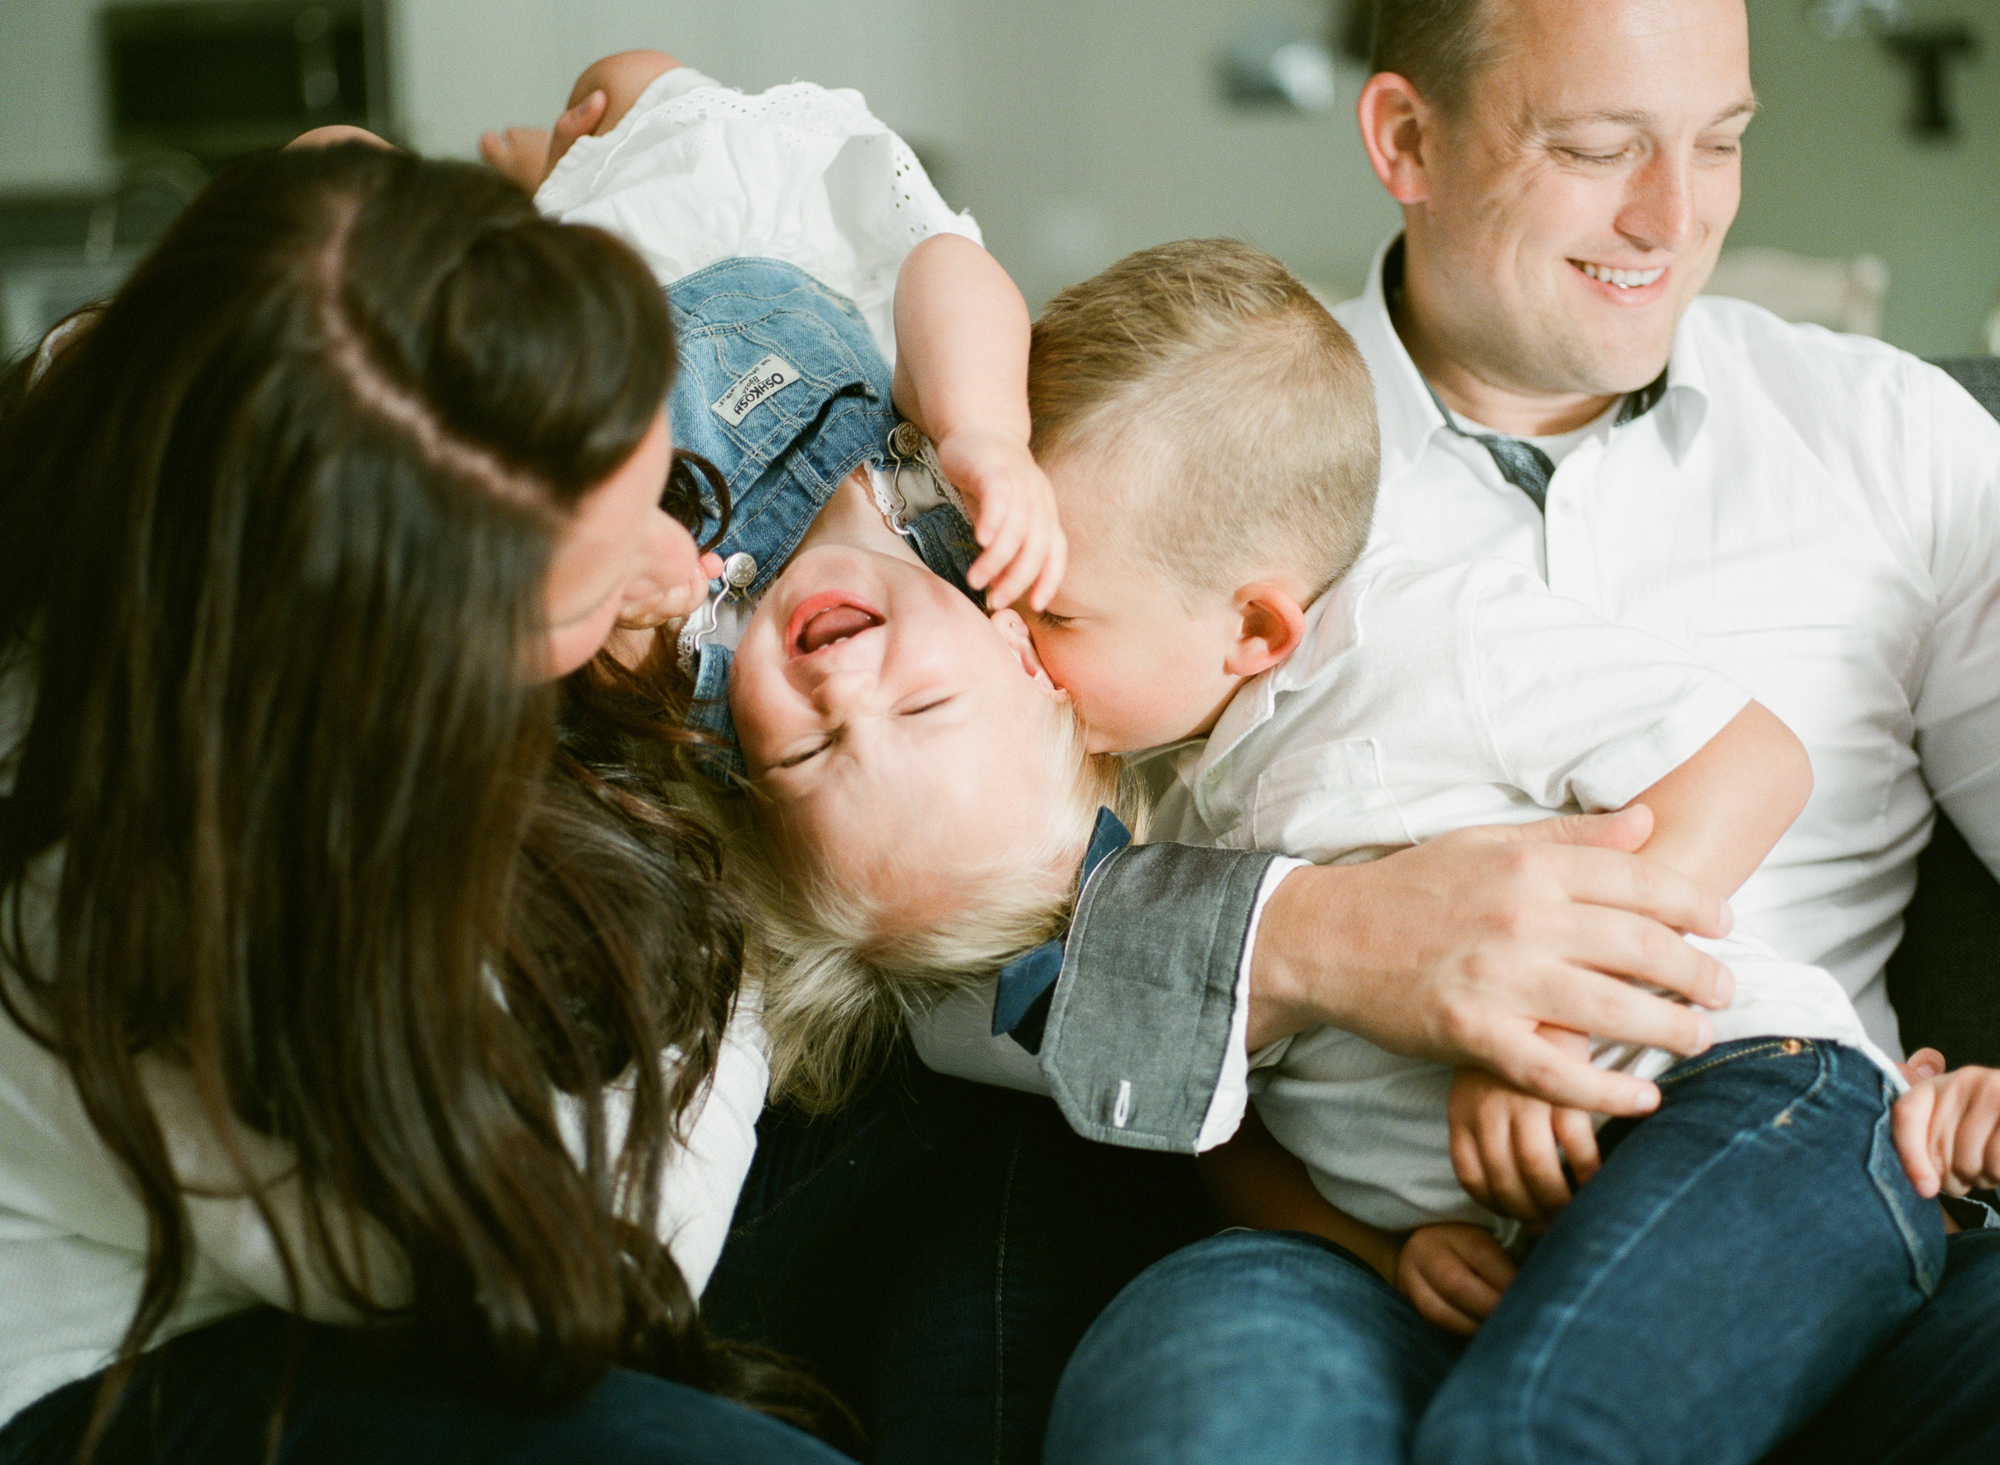 raleigh-family-film-photographer-lifestyle-home-photography-session-002